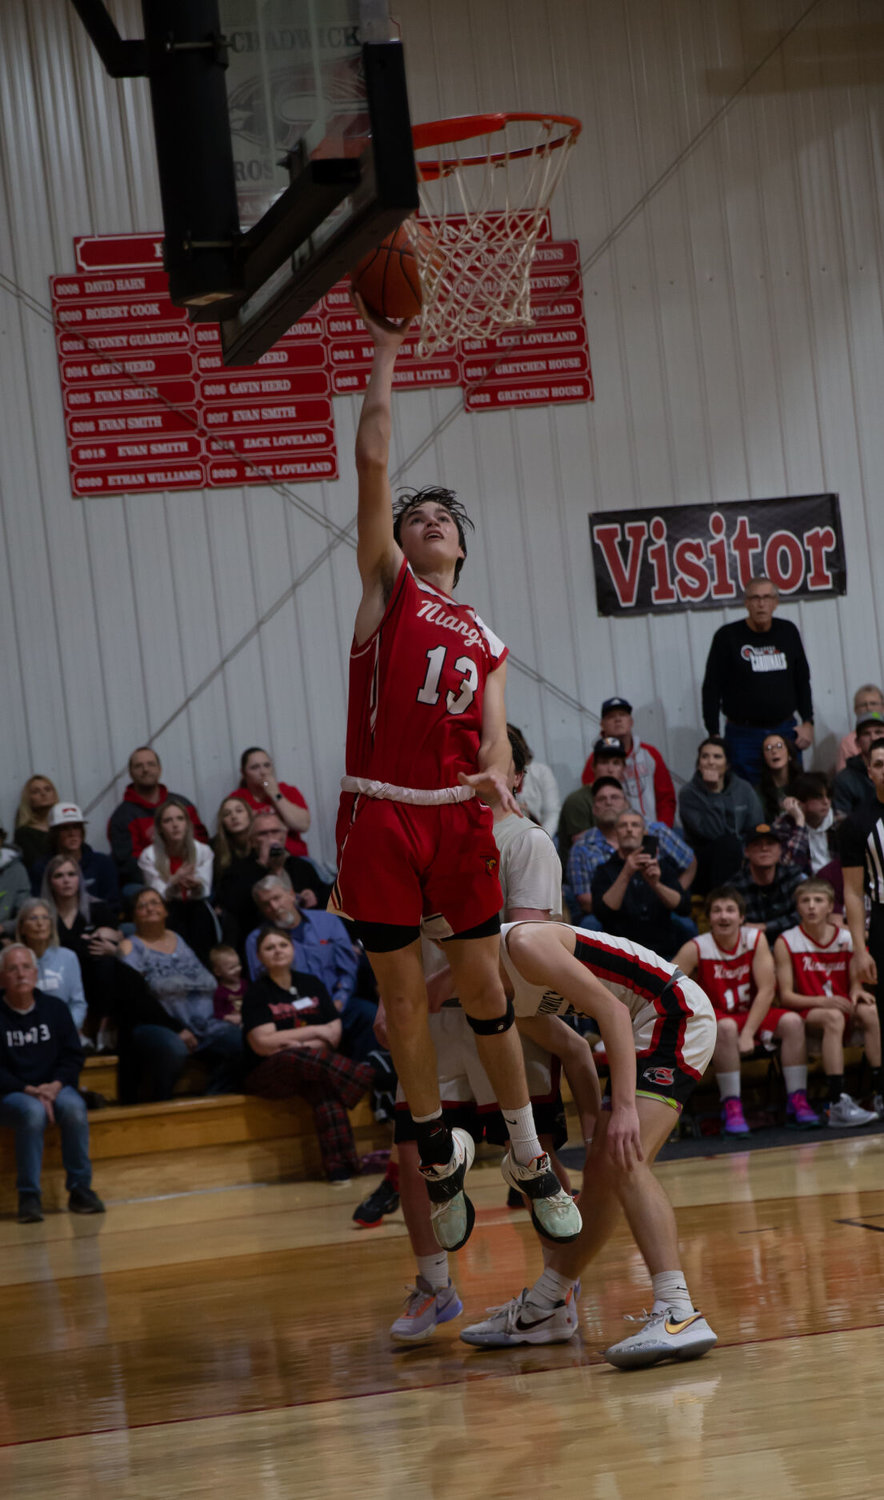 Pictured scoring a basket for the Cardinals is Niangua junior Evan Kochs, who scored 10 points during the match.